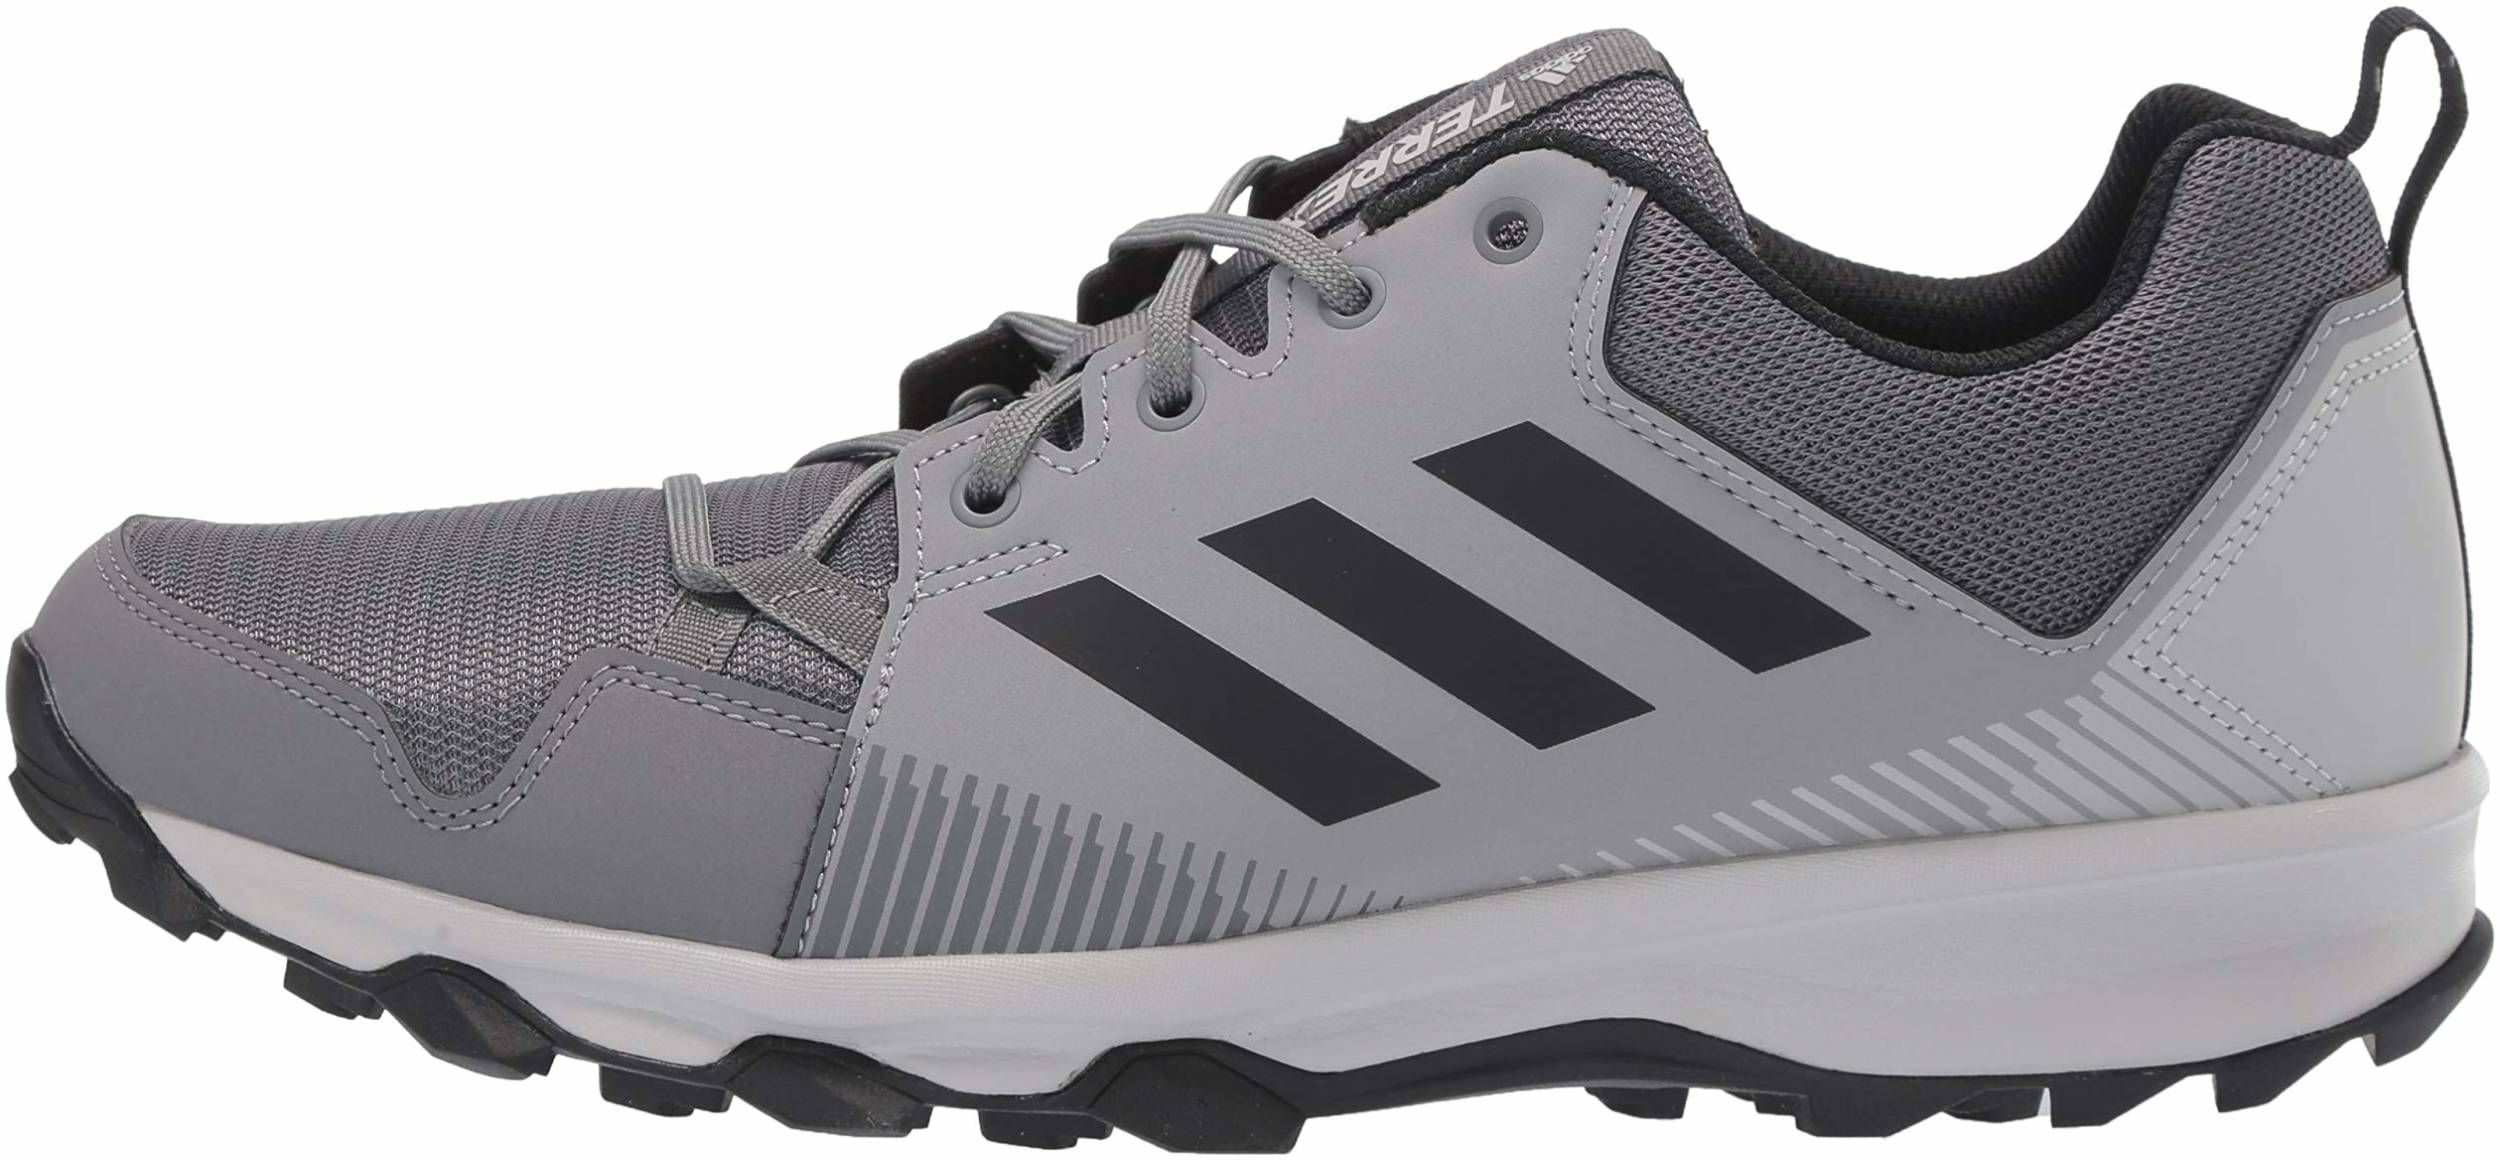 Save 57% on Adidas Trail Running Shoes 